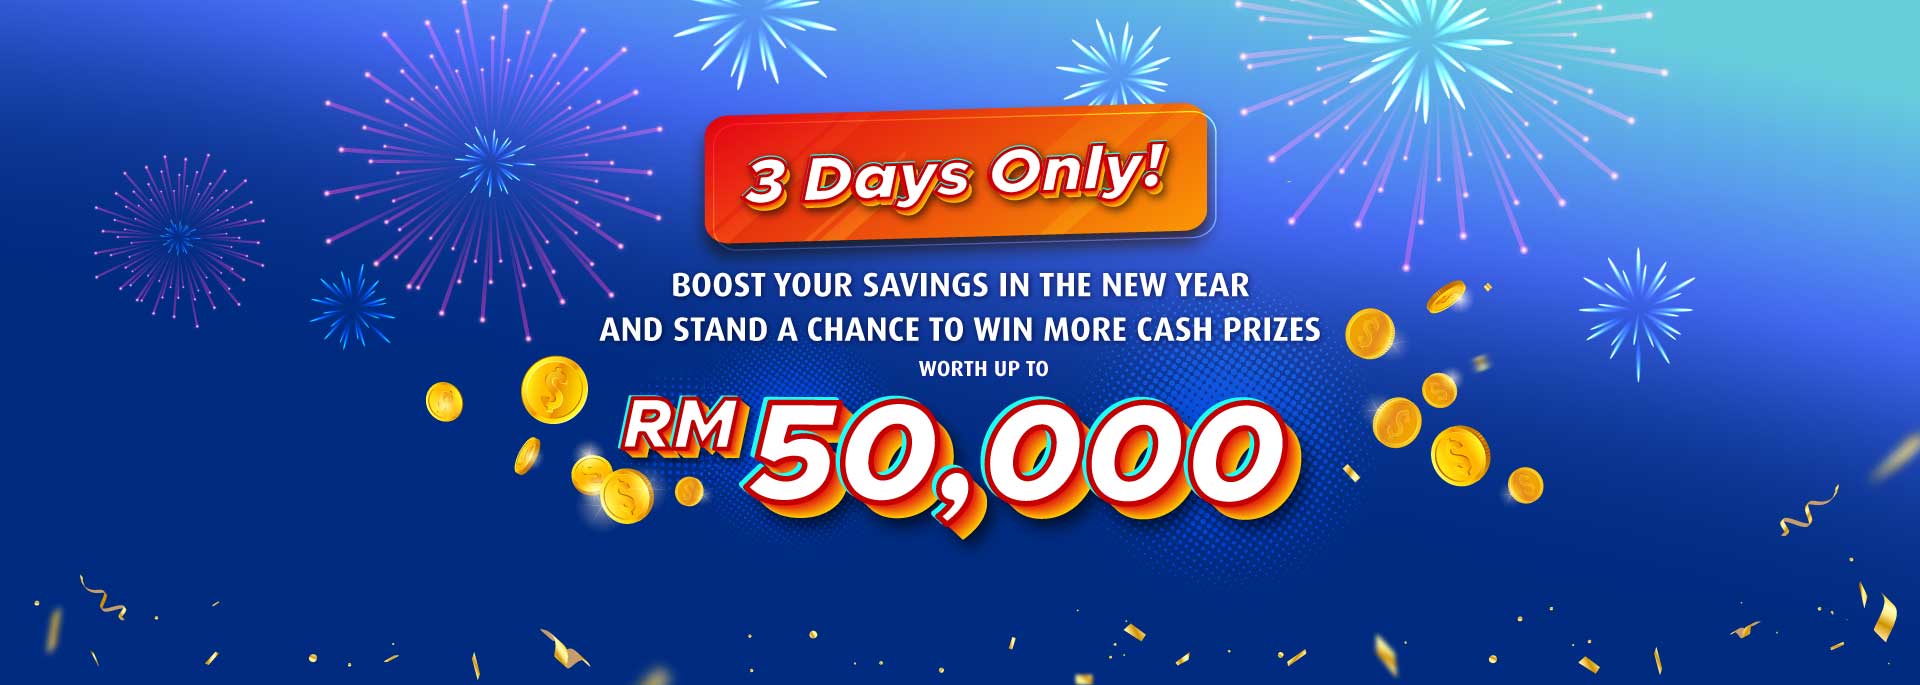 3 days only. Up to RM50,000 Cash Prizes to be won!